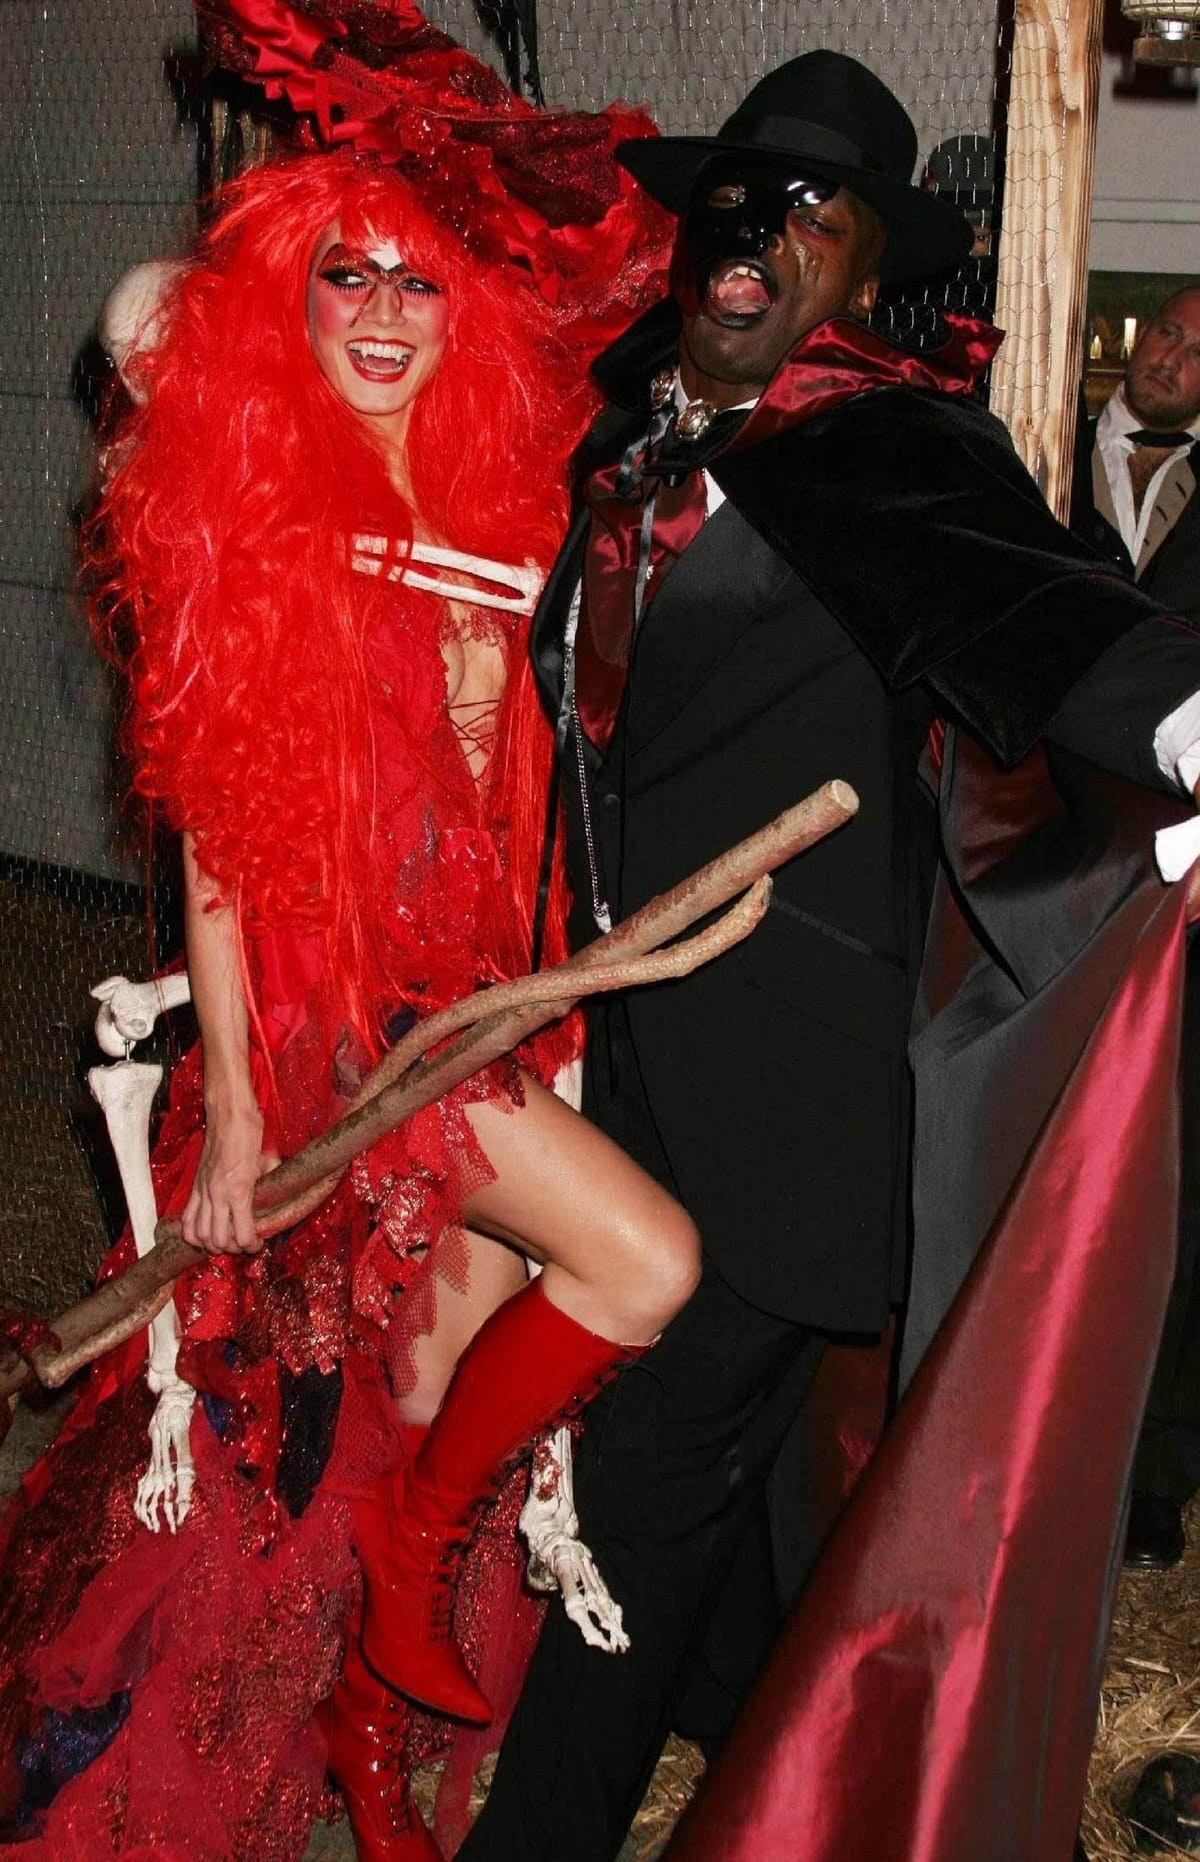 Heidi Klum as a red witch and Seal as the Phantom from The Phantom of the Opera attend her 5th Annual Halloween party